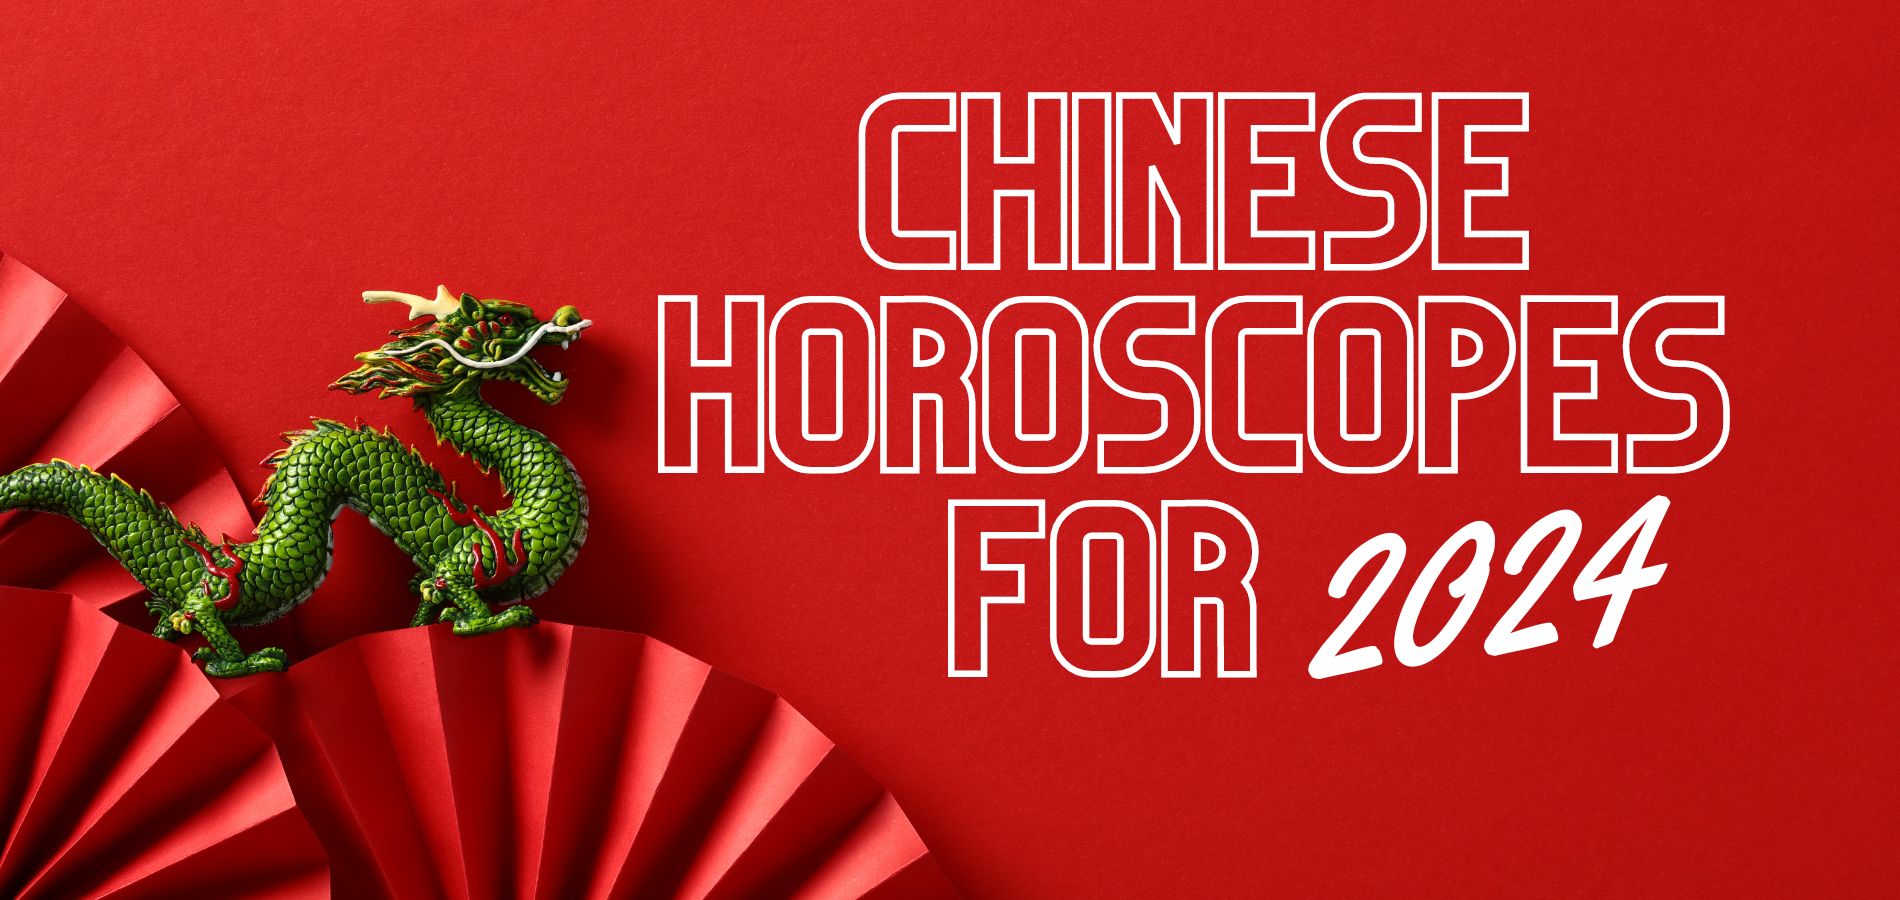 Chinese Horoscopes for 2024 Which signs are most fortunate for this